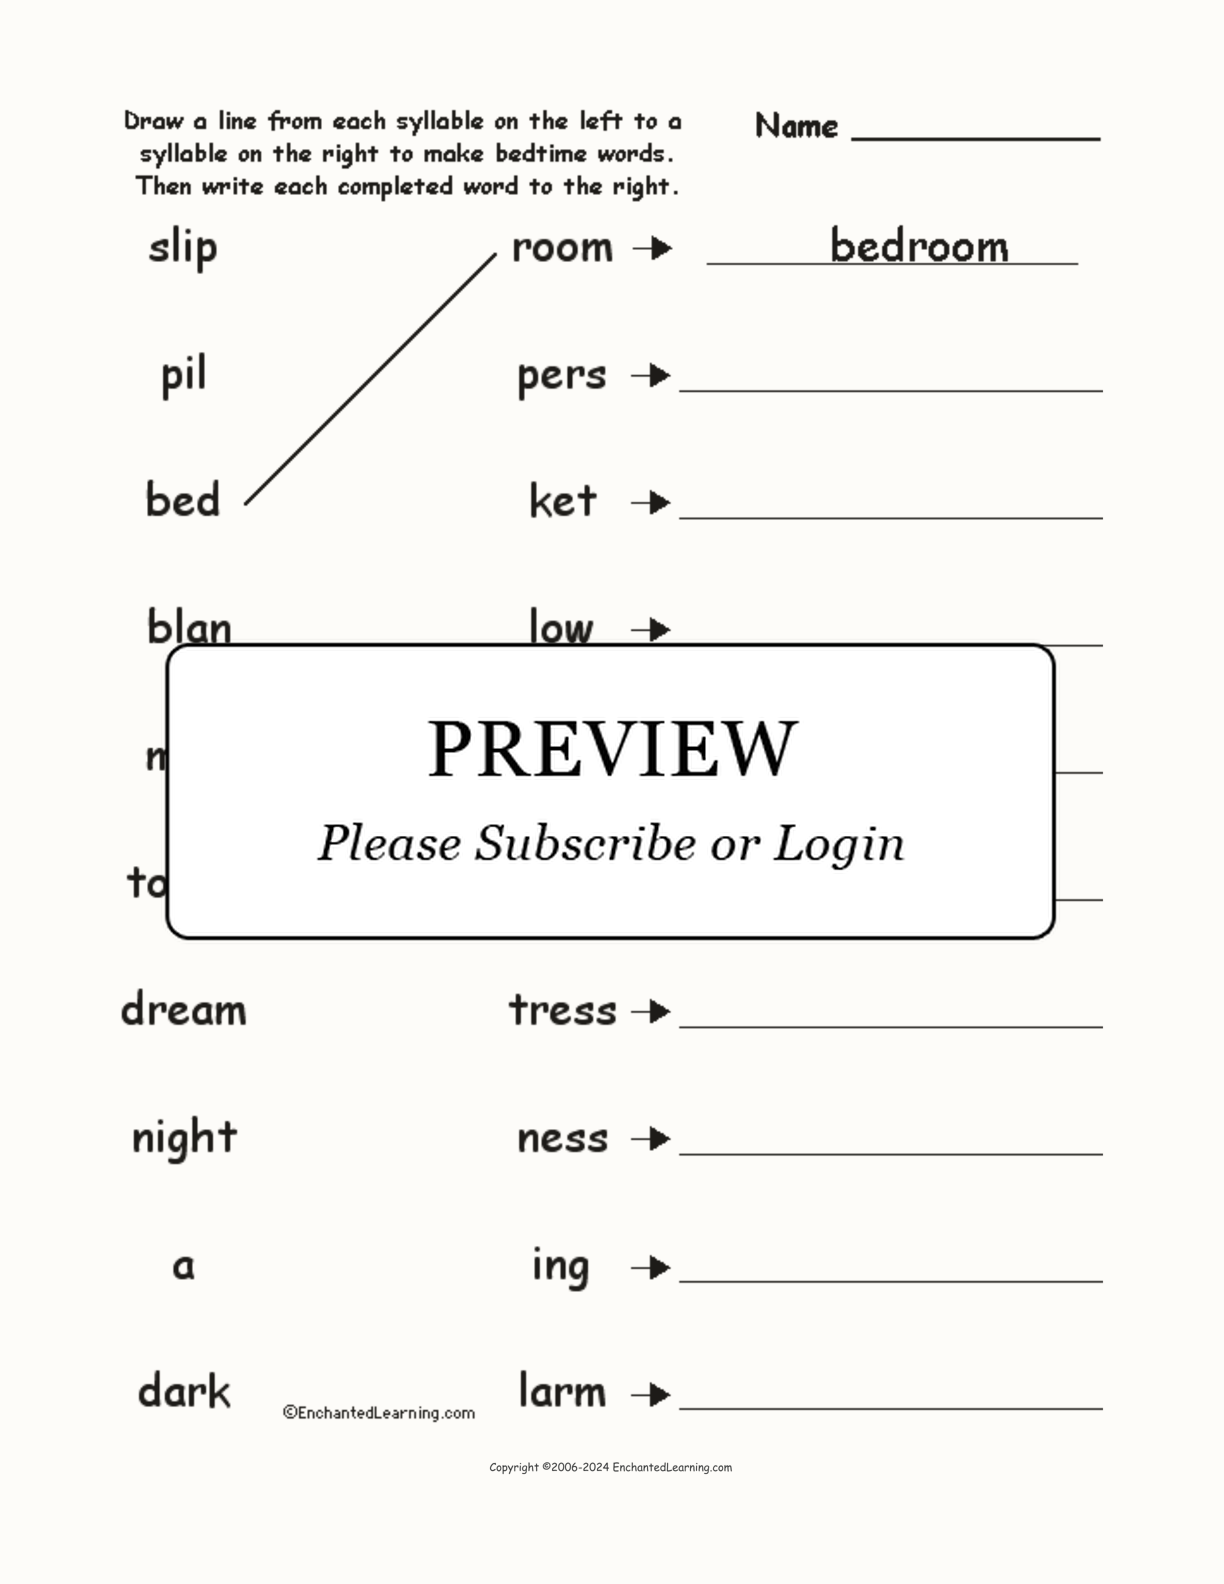 Match the Syllables: Bedtime Words interactive worksheet page 1